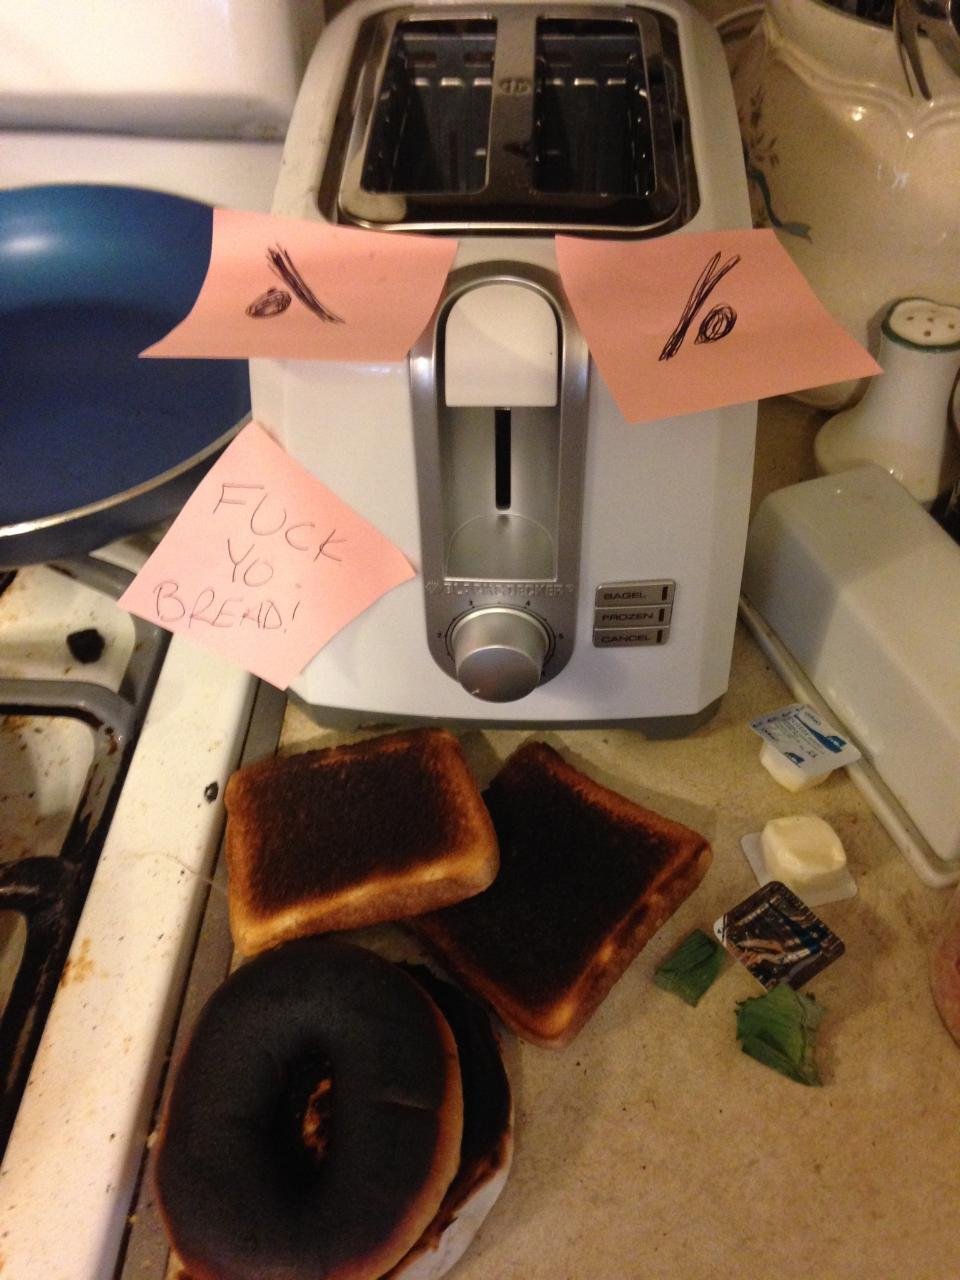 "Our toaster is a real asshole." A message from my brother.